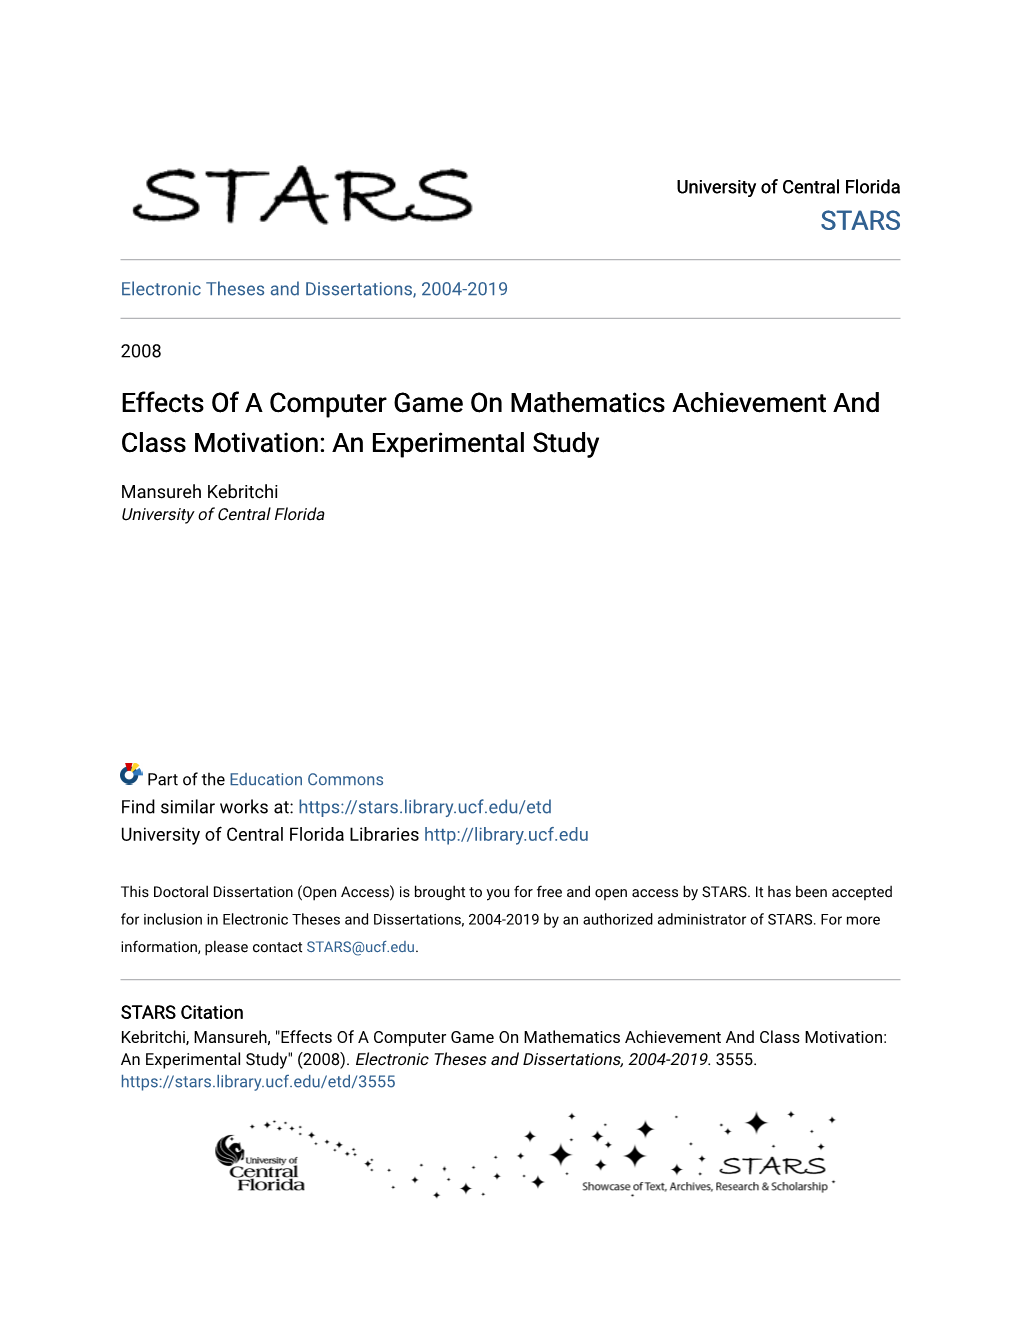 Effects of a Computer Game on Mathematics Achievement and Class Motivation: an Experimental Study